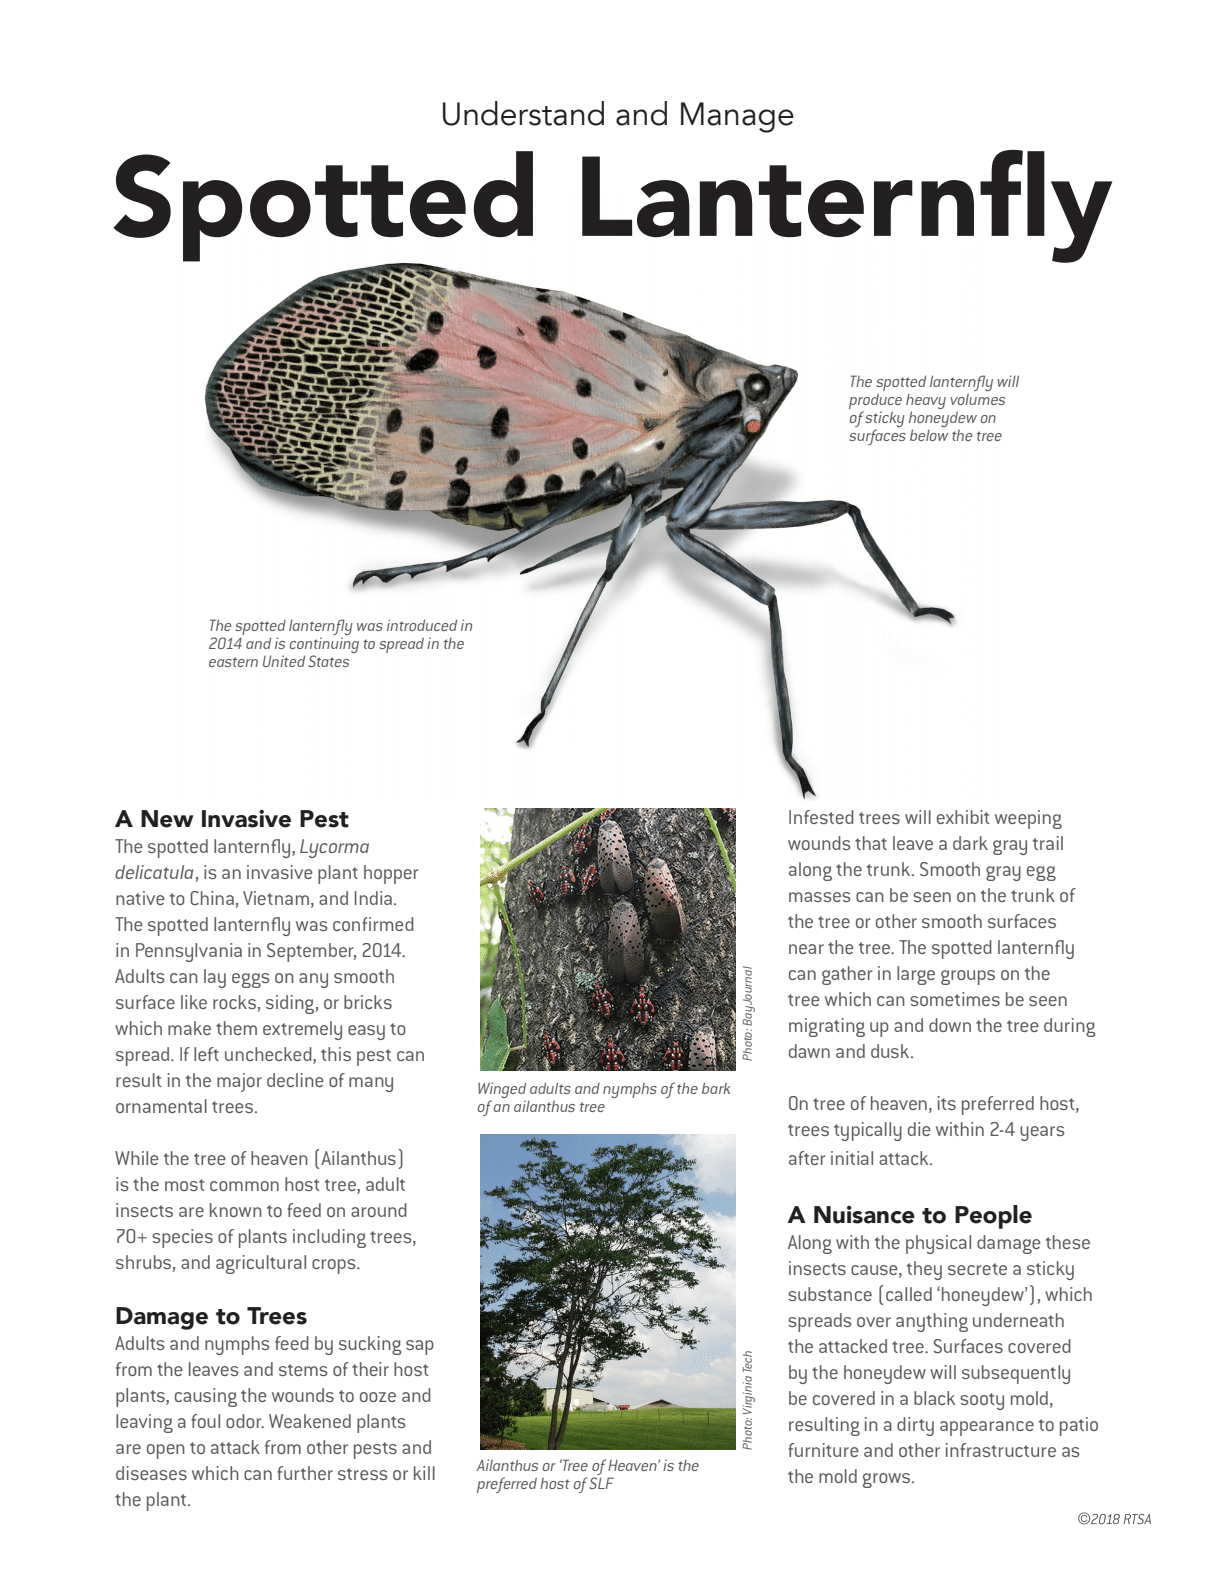 Educational poster titled "Understand and Manage Spotted Lanternfly" detailing the invasive lanternfly species, their impact on trees, and nuisance to people. Includes images of the insect and affected trees.